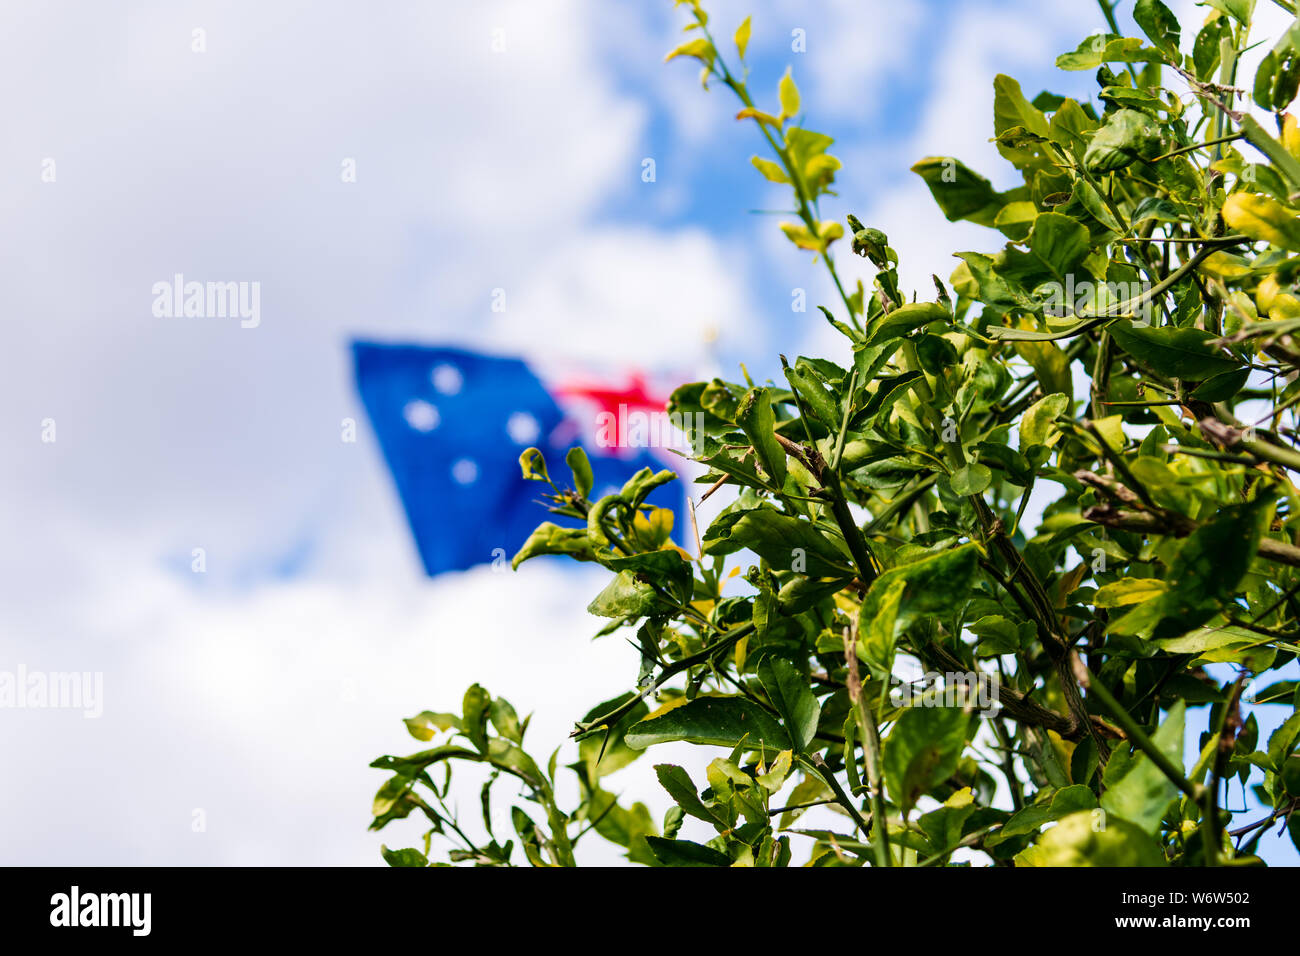 The Australian on a Flag Pole with a bush in the foreground. Stock Photo